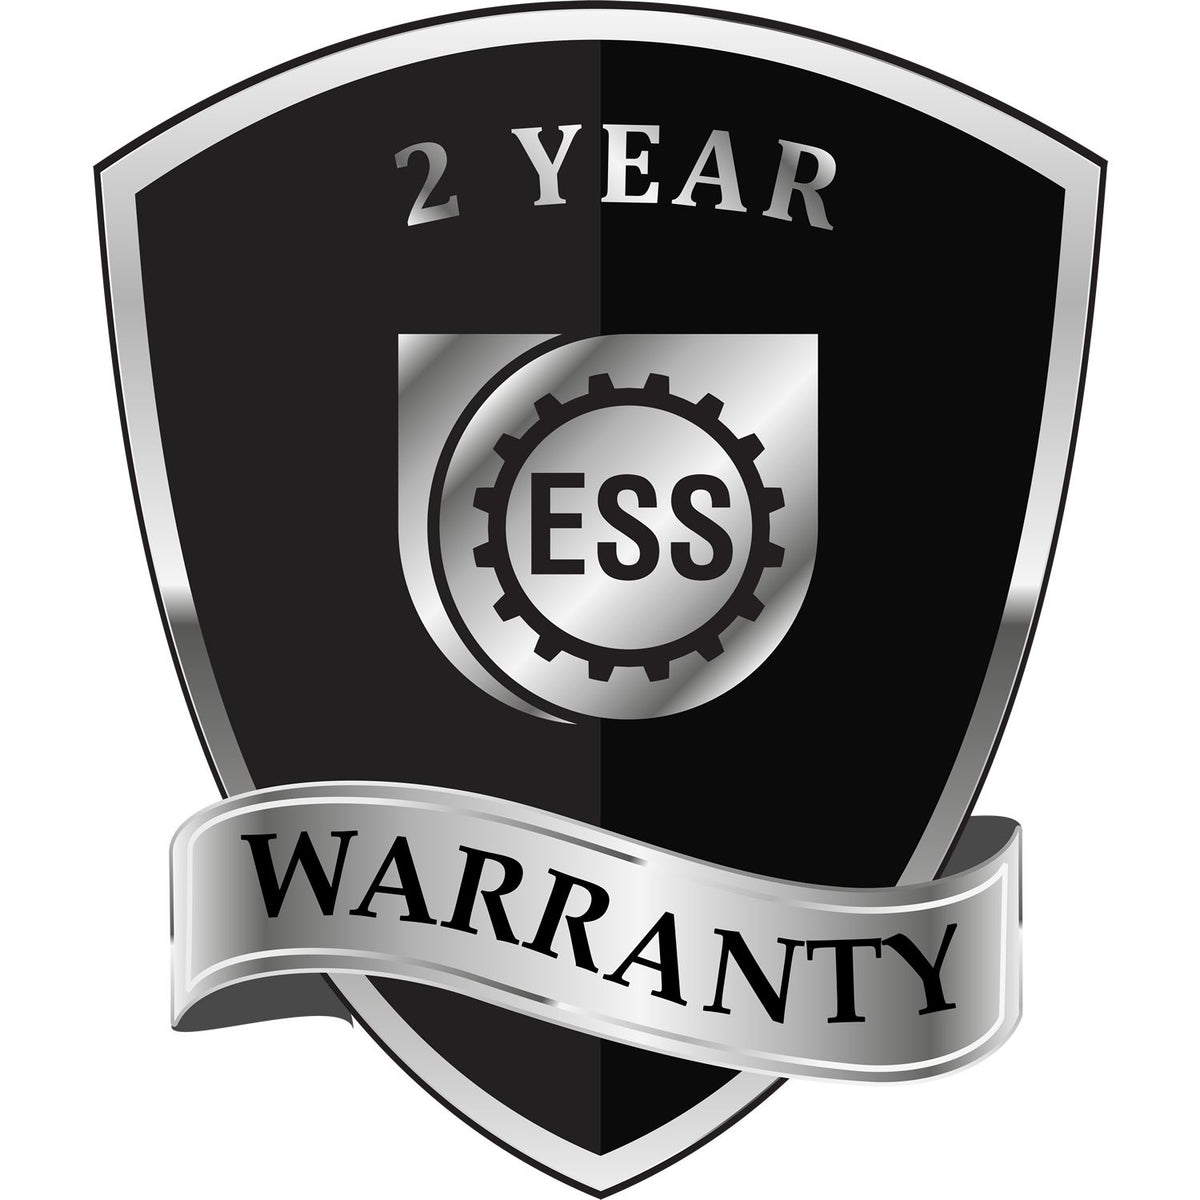 A black and silver badge or emblem showing warranty information for the Gift Rhode Island Landscape Architect Seal